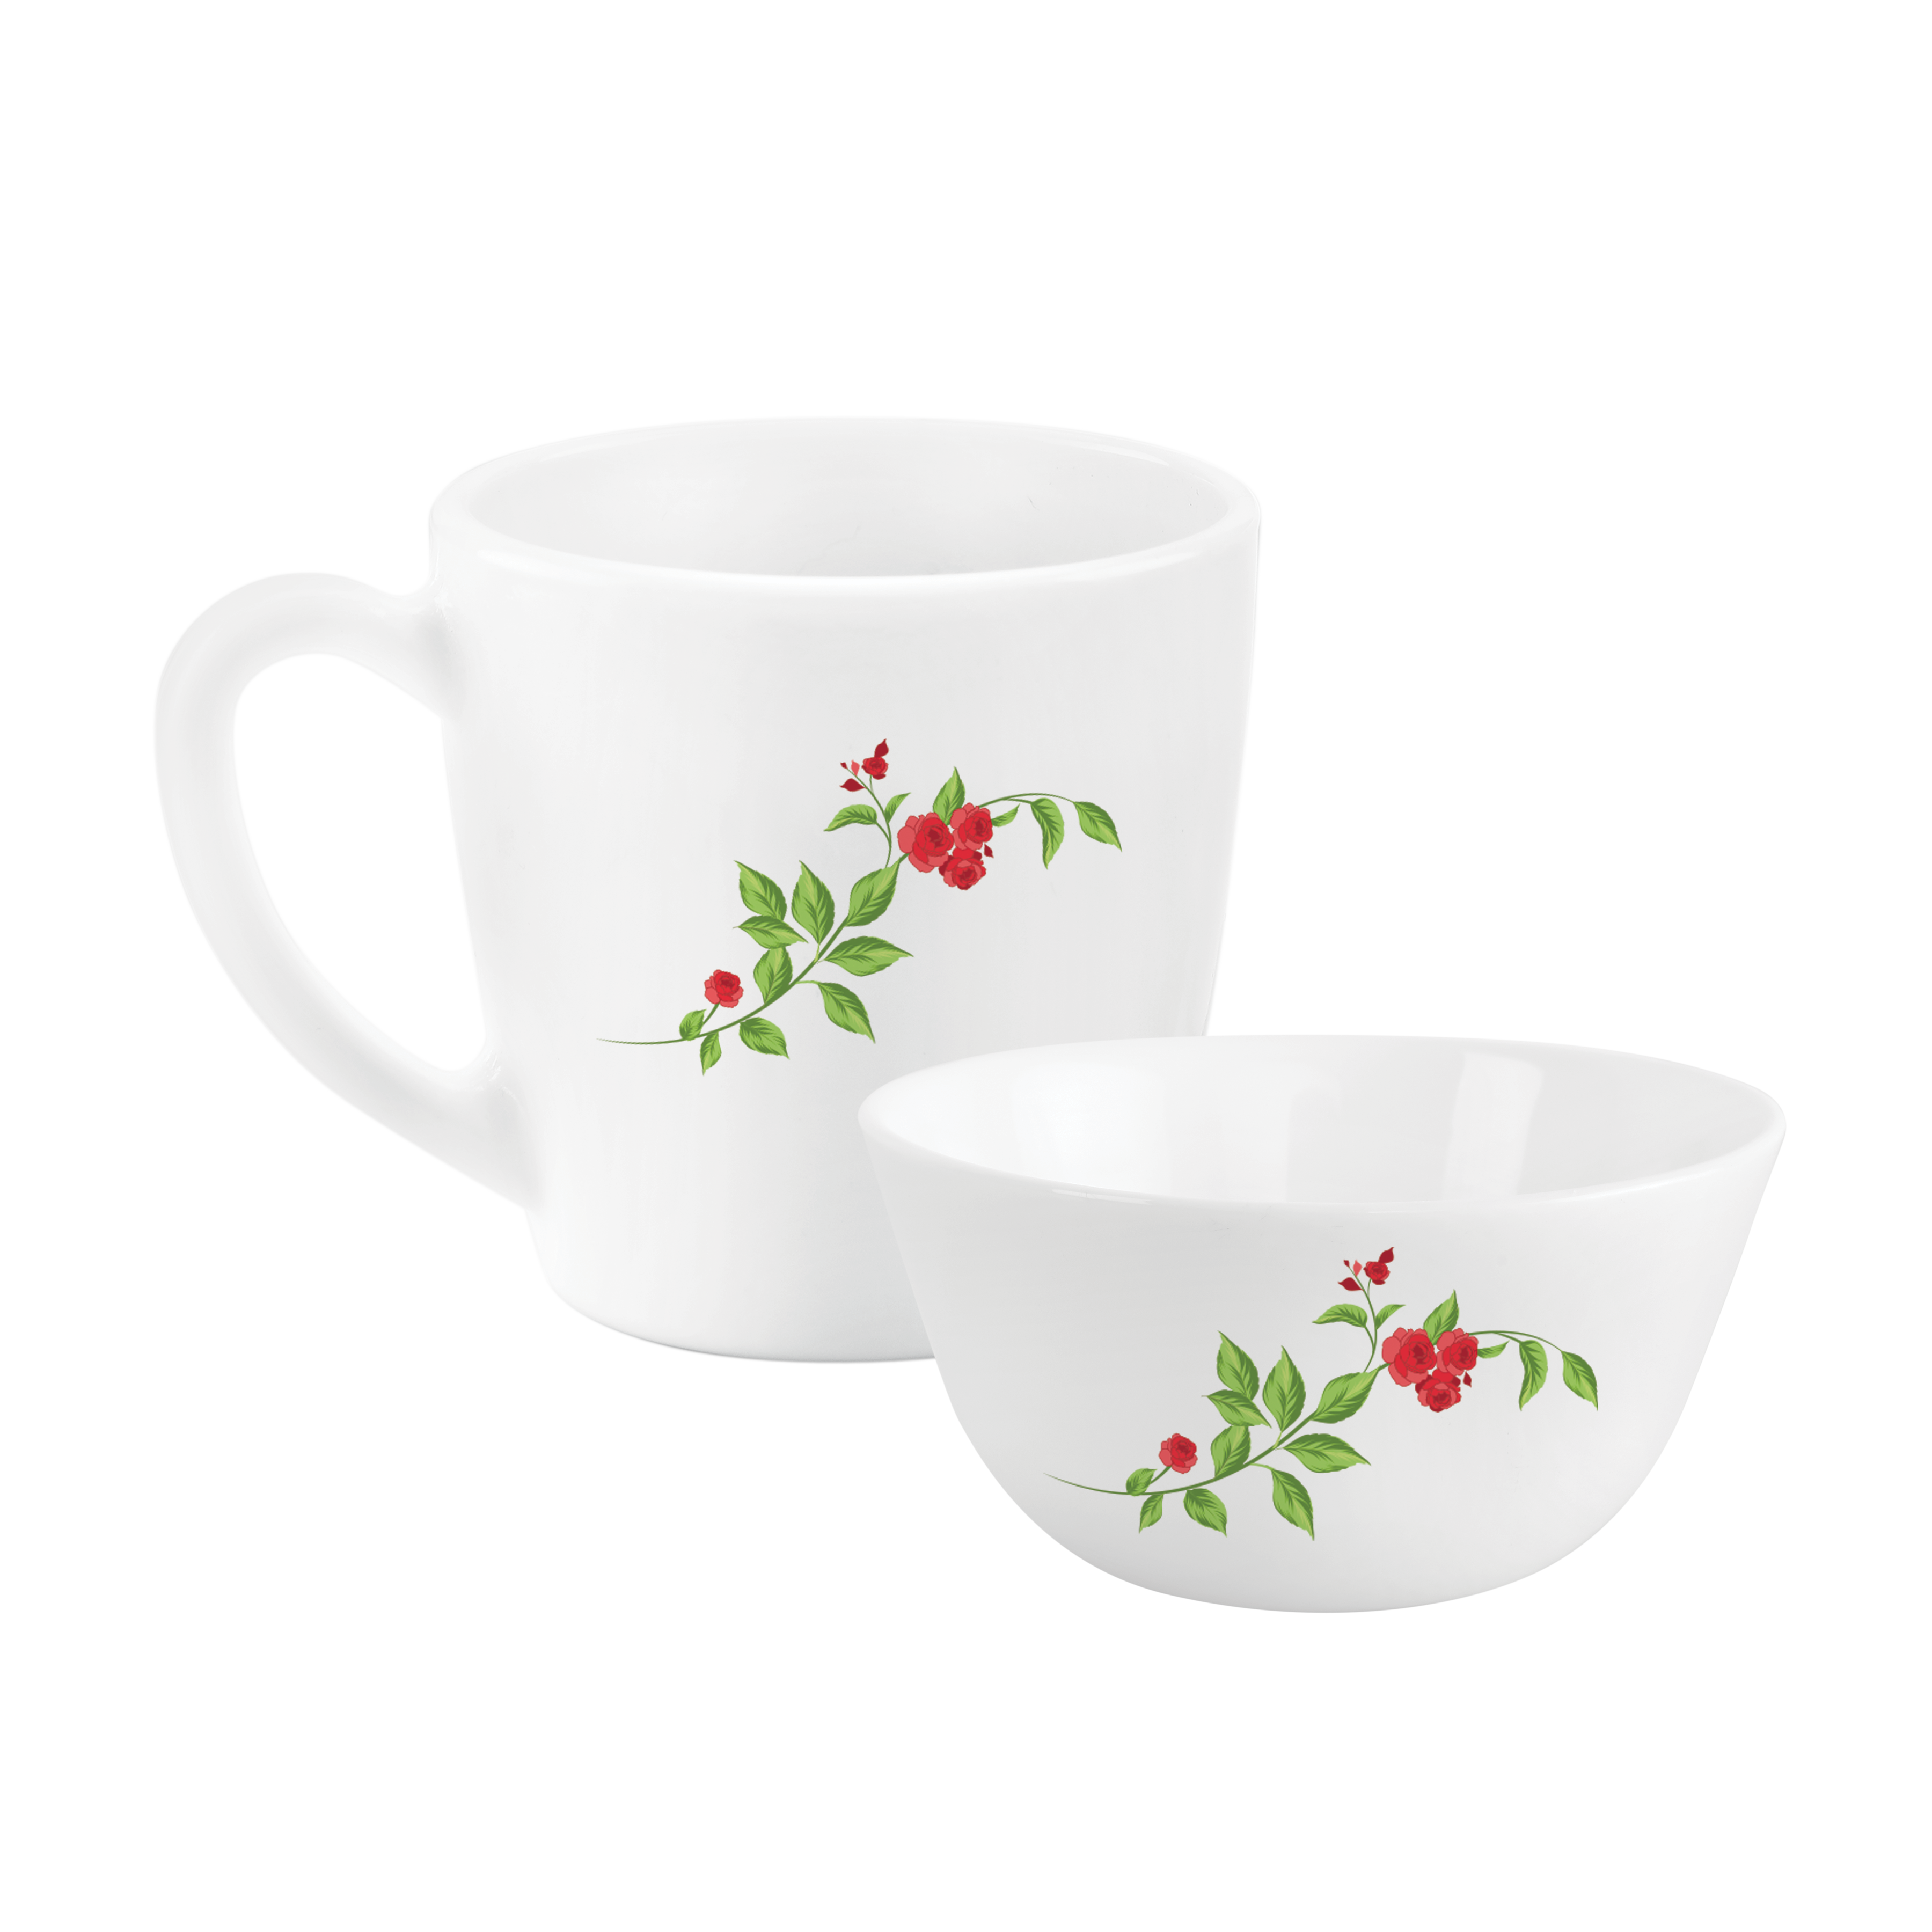 Imperial Series Breakfast Bowl & Mug Gift set, 4 Pieces Imperial Rose / 4 Pieces